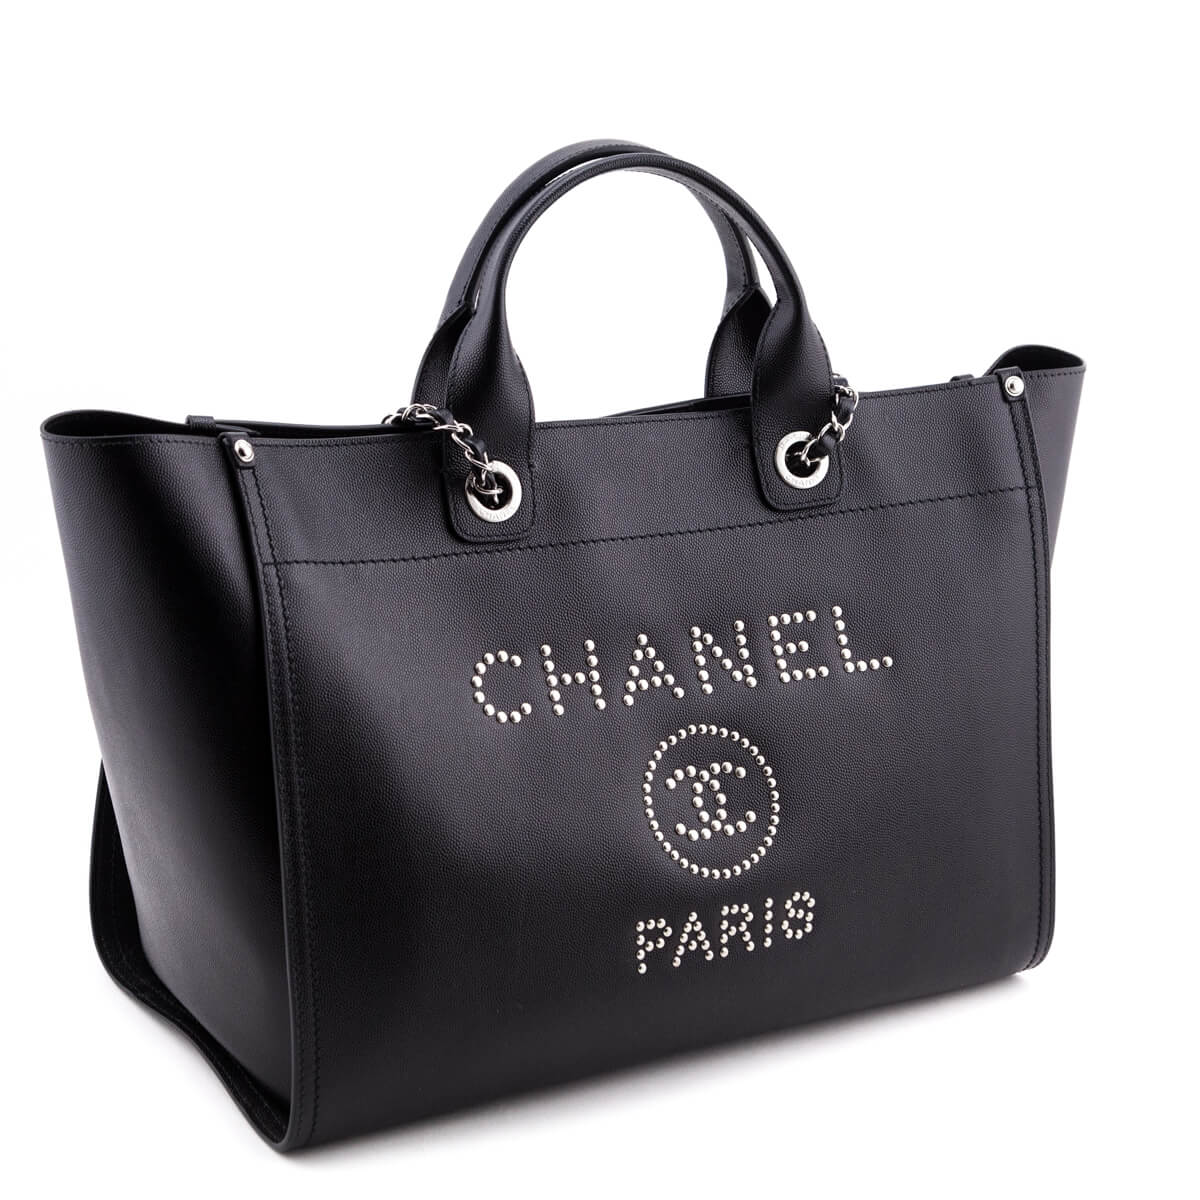 Chanel Black Grained Calfskin Large Deauville Tote SHW - Love that Bag etc - Preowned Authentic Designer Handbags & Preloved Fashions